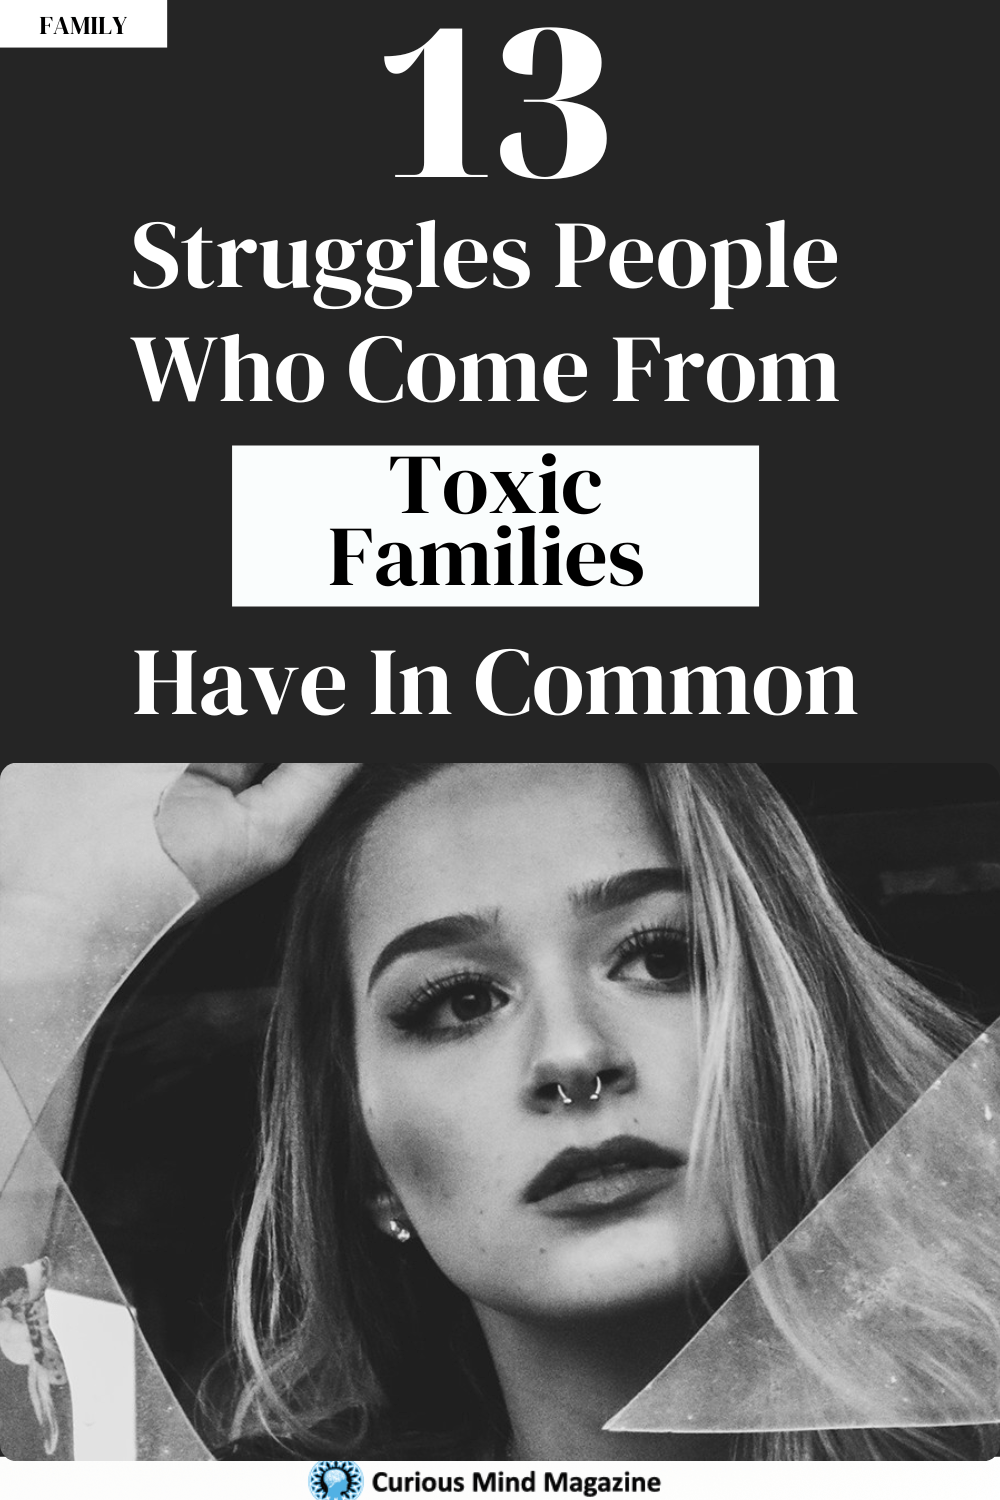 13 Struggles People Who Come From Toxic Families Have In Common